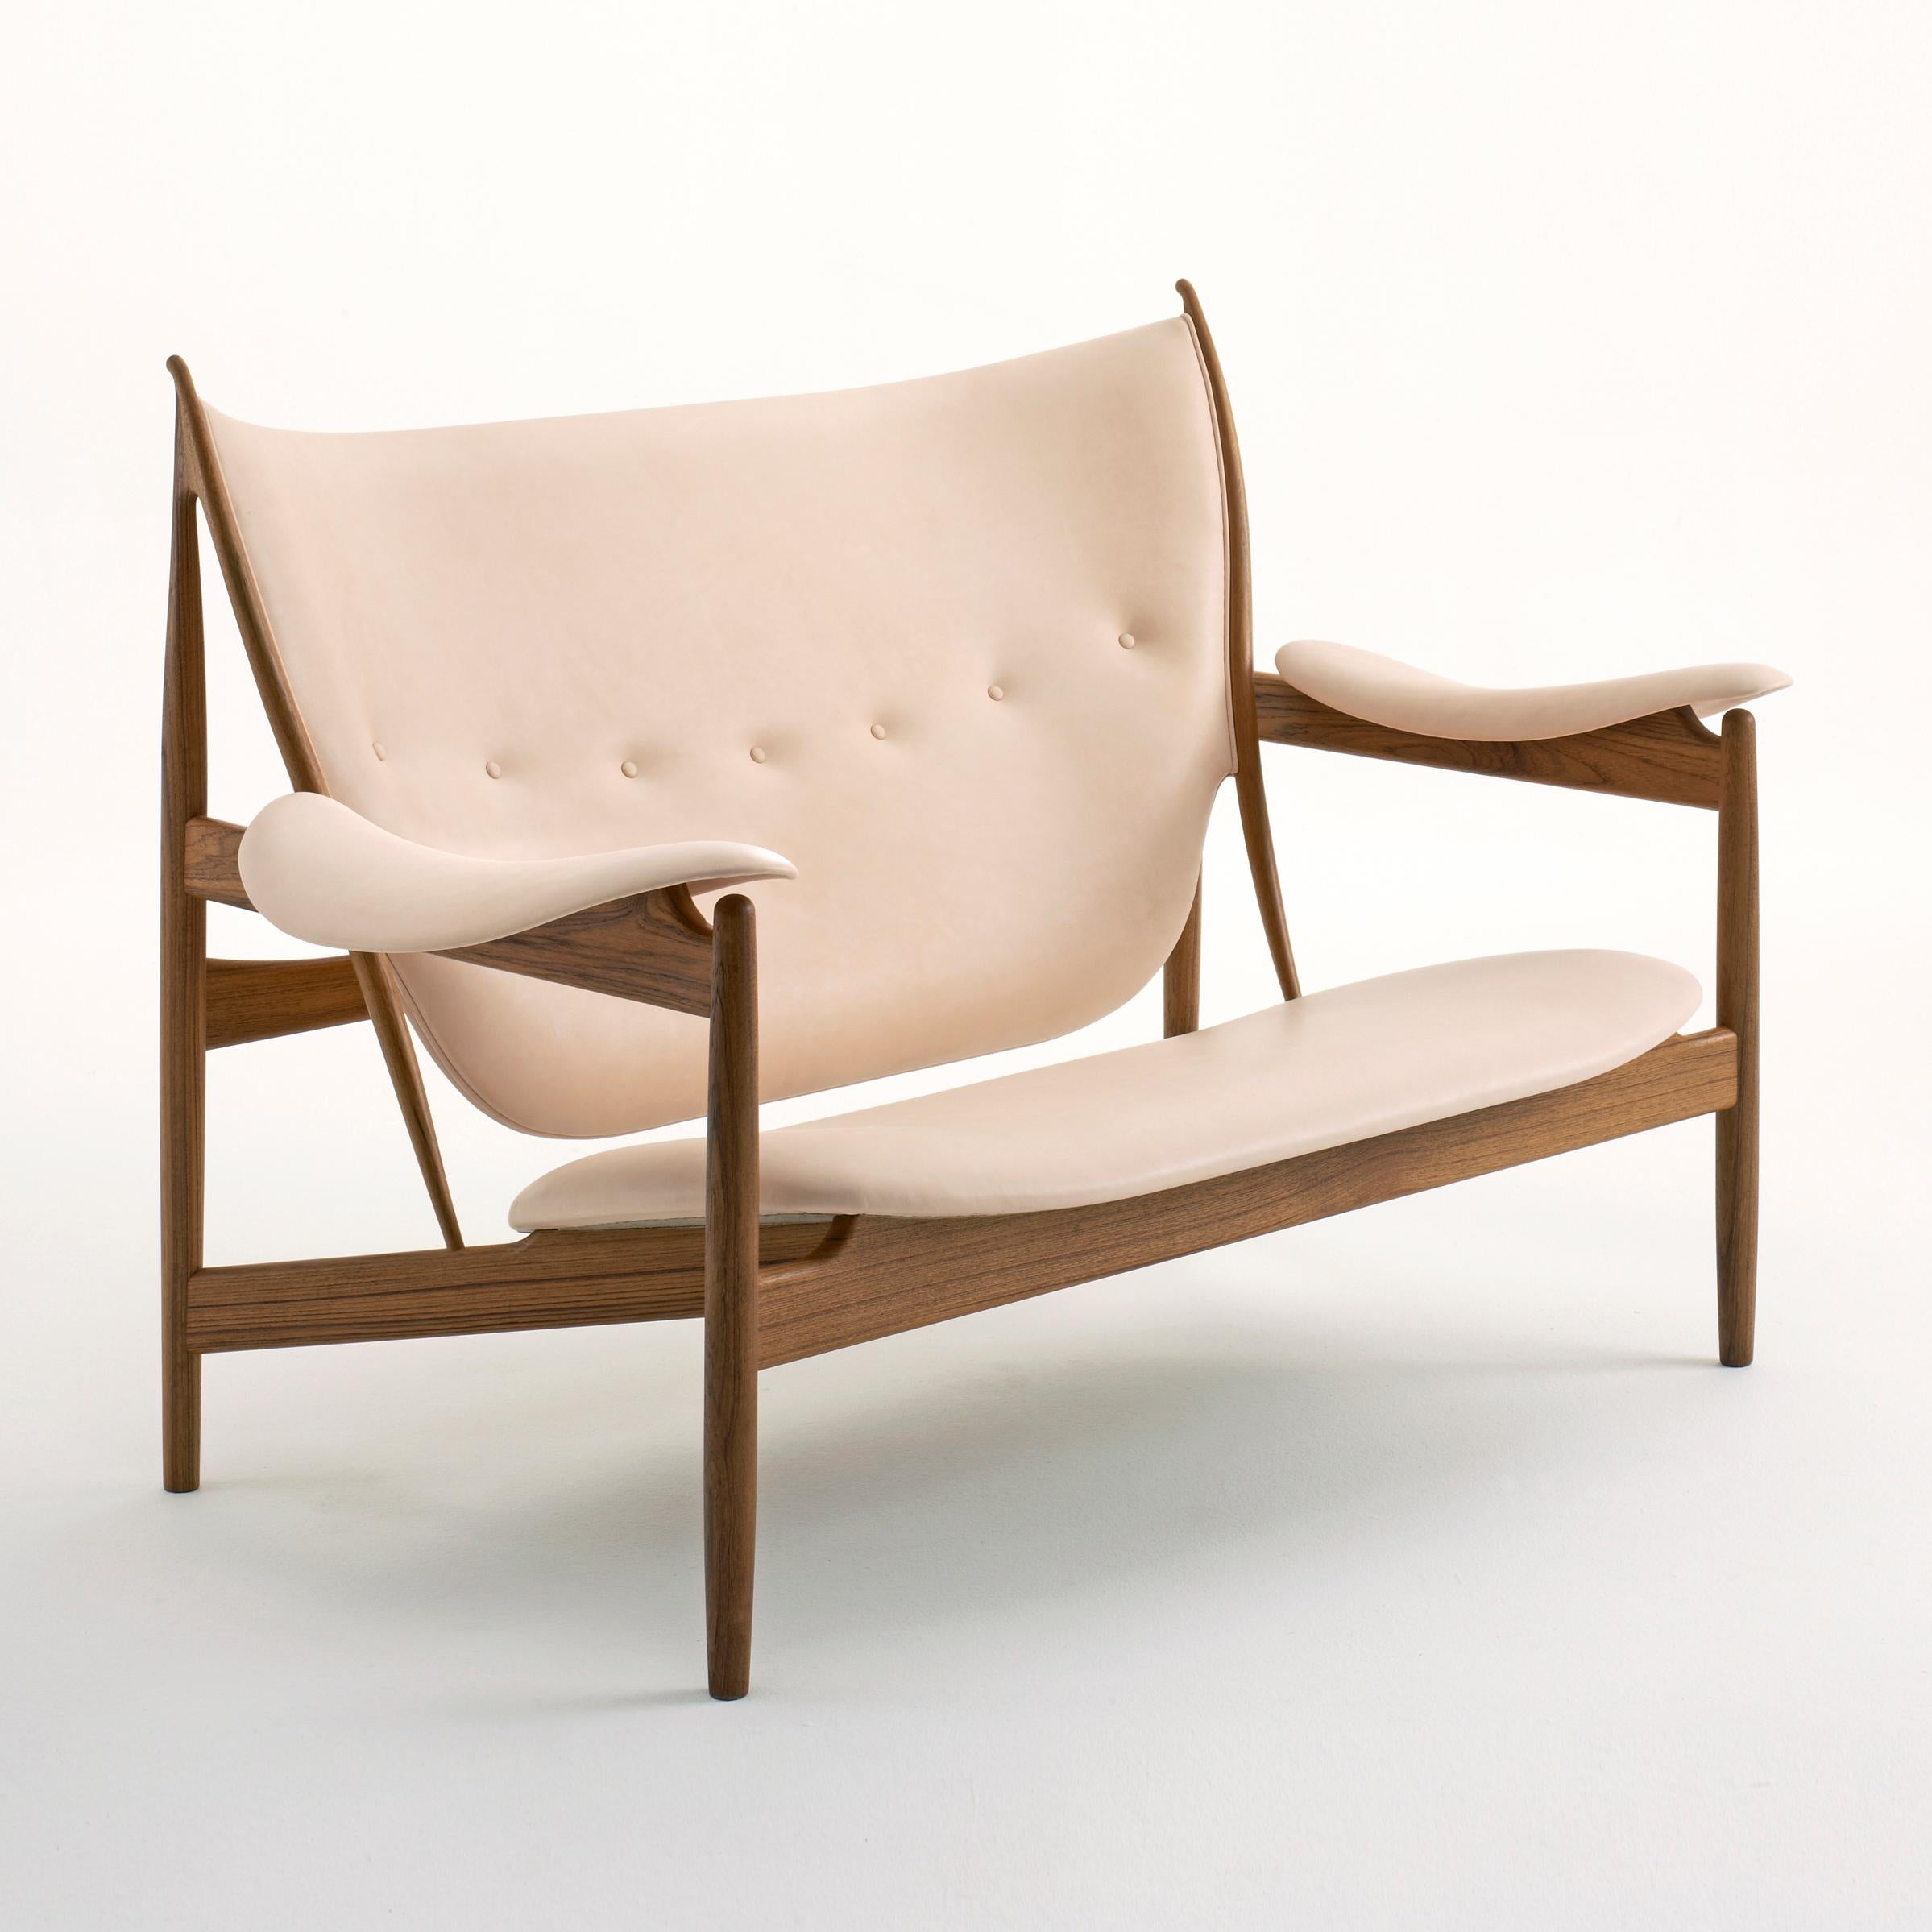 Modern Finn Juhl Chieftain Sofa Couch Wood and Leather